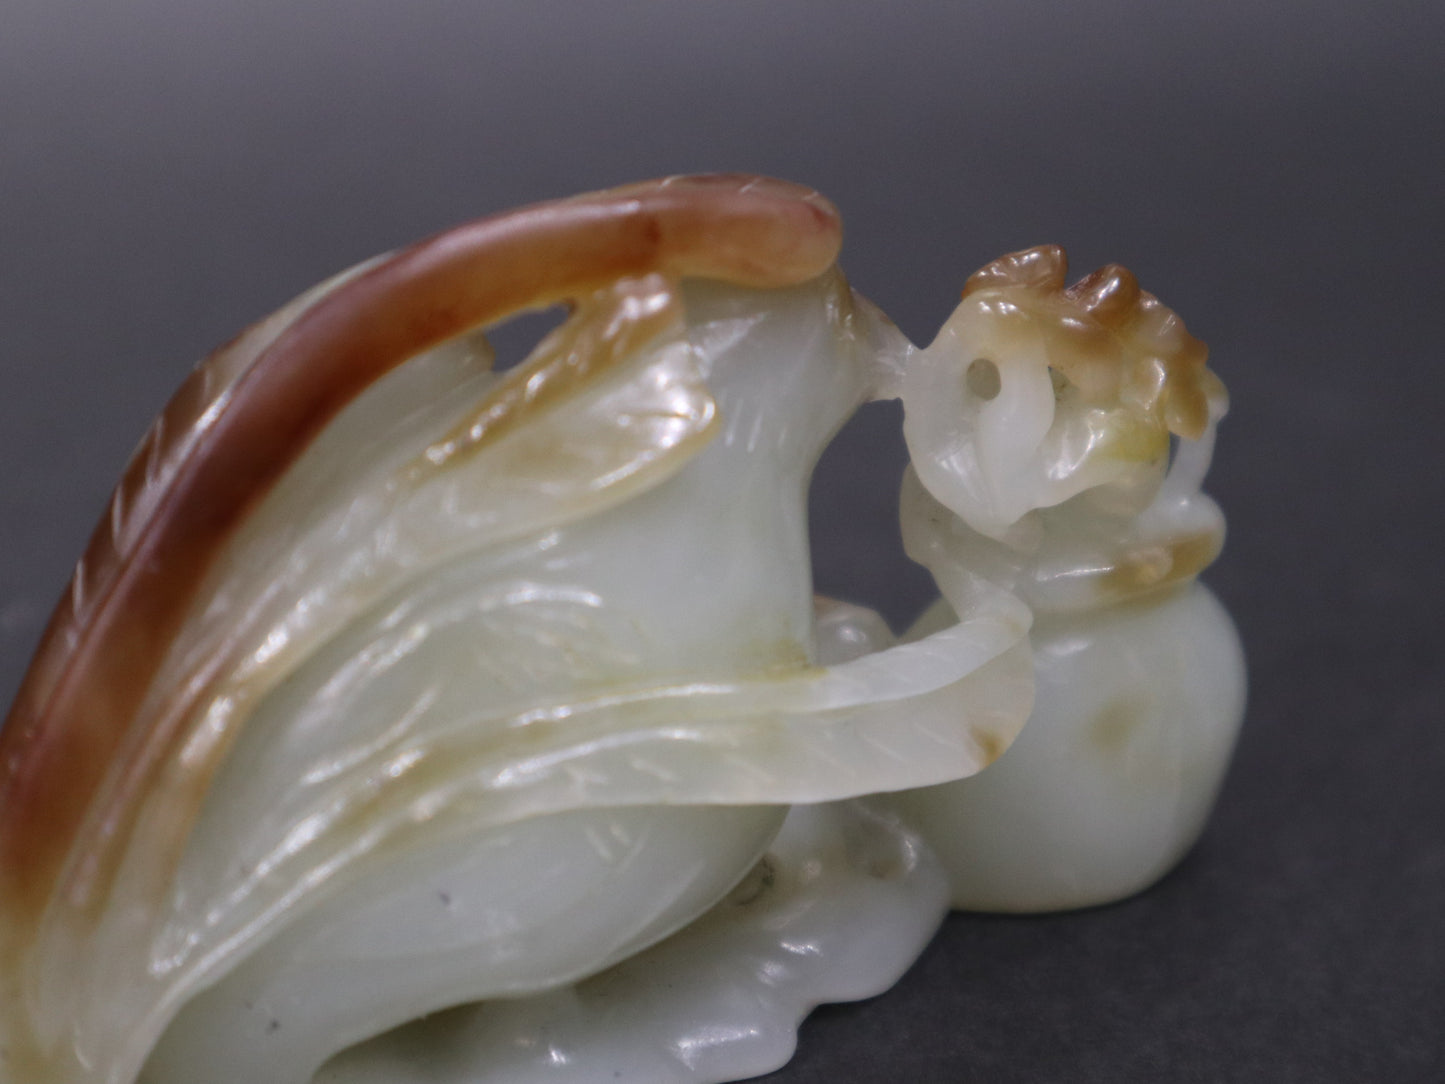 A Yellow Jade Figure of Quail, 18th century Qing Dynasty